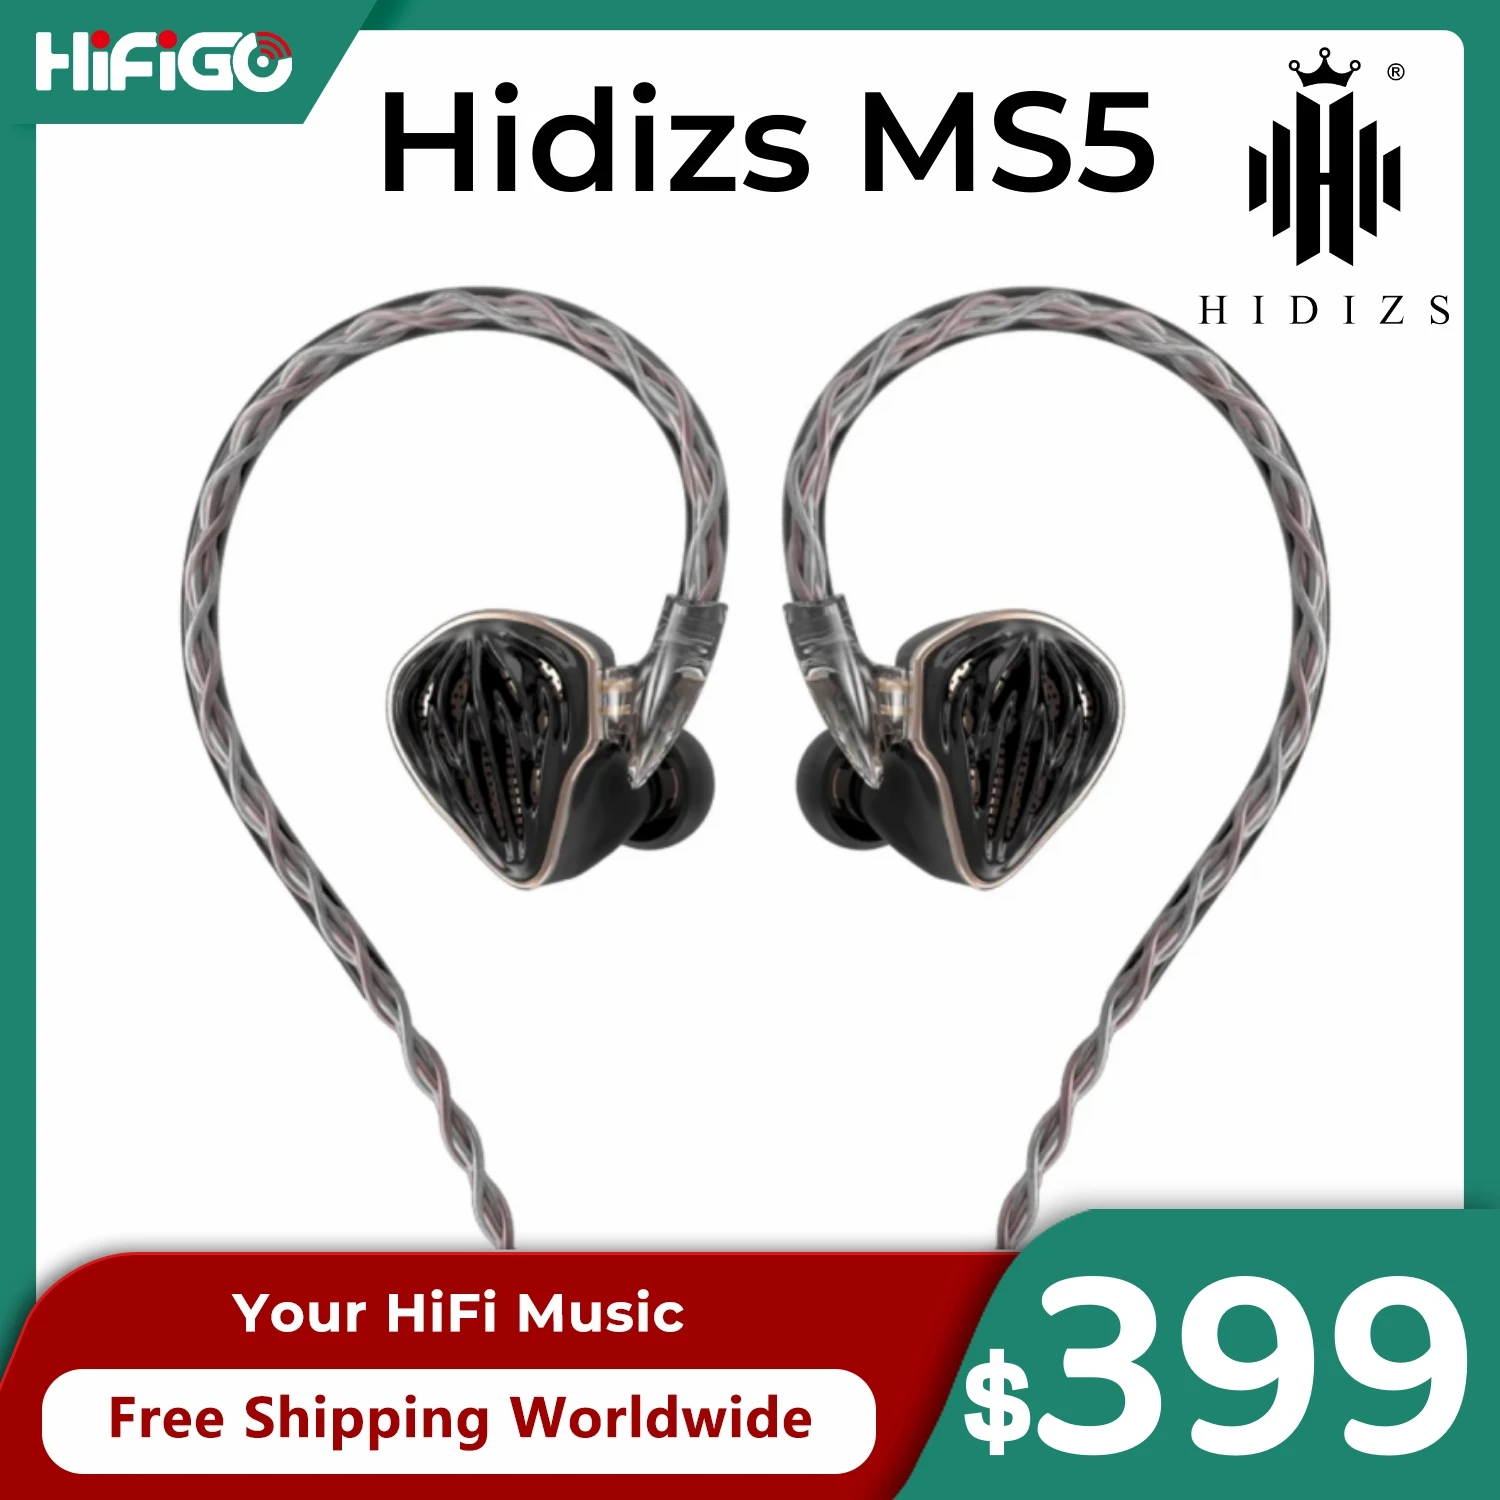 

Hidizs MS5 Flagship 4BA+1DD Hybrid IEMs HiFi In-Ear Monitor Earphone with 2 Detachable Cable & 3 Pairs Replaceable Tuning Nozzle